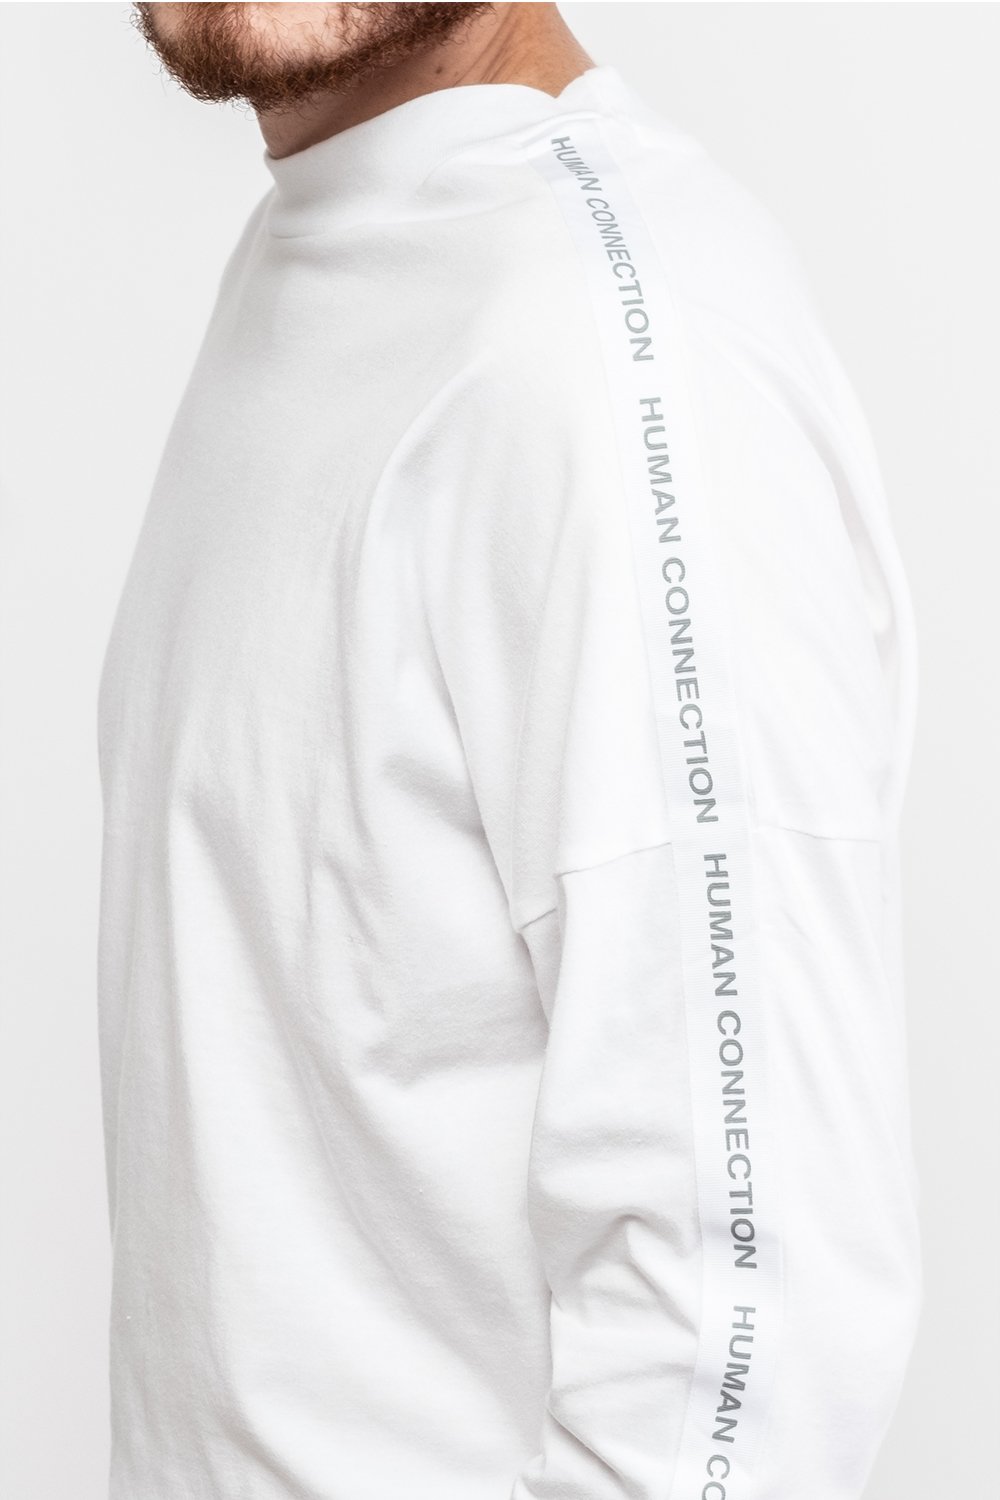 Human Connection 3/4 Sleeve T-Shirt - White - BISKIT 